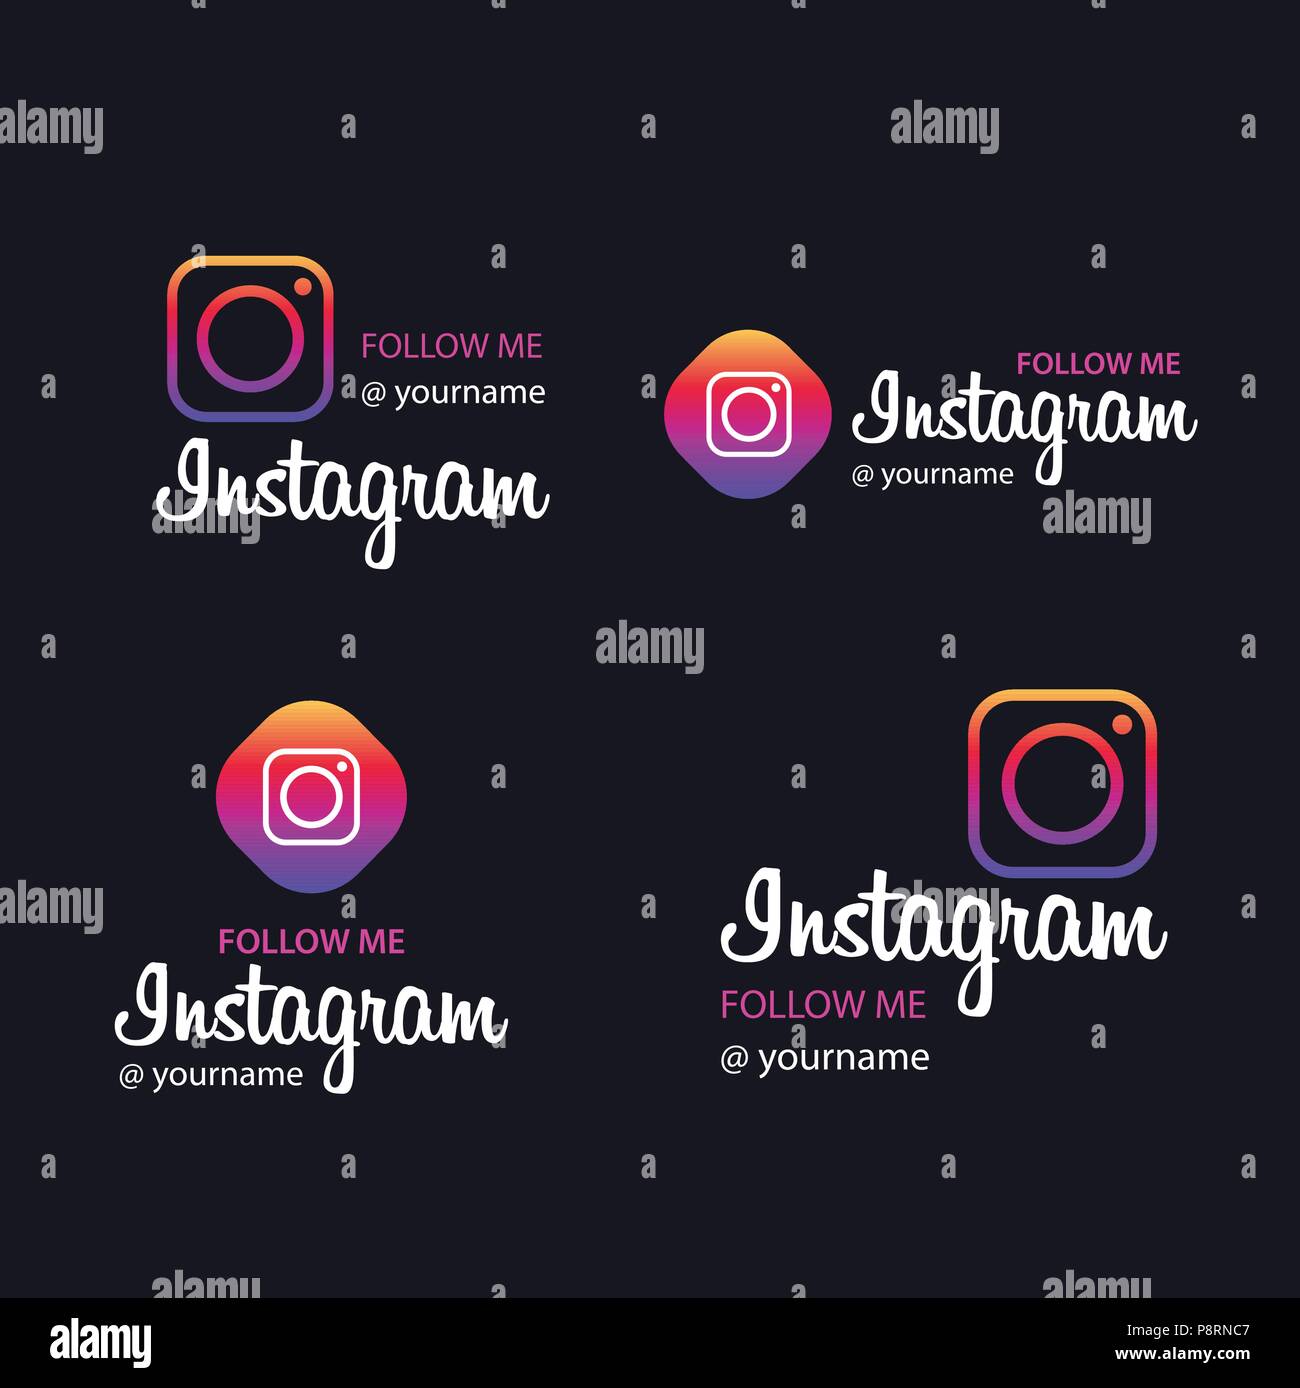 Follow Me On Instagram Banners For Web Design And Application Interface Also Useful For Infographics Vector Illustration Stock Vector Image Art Alamy